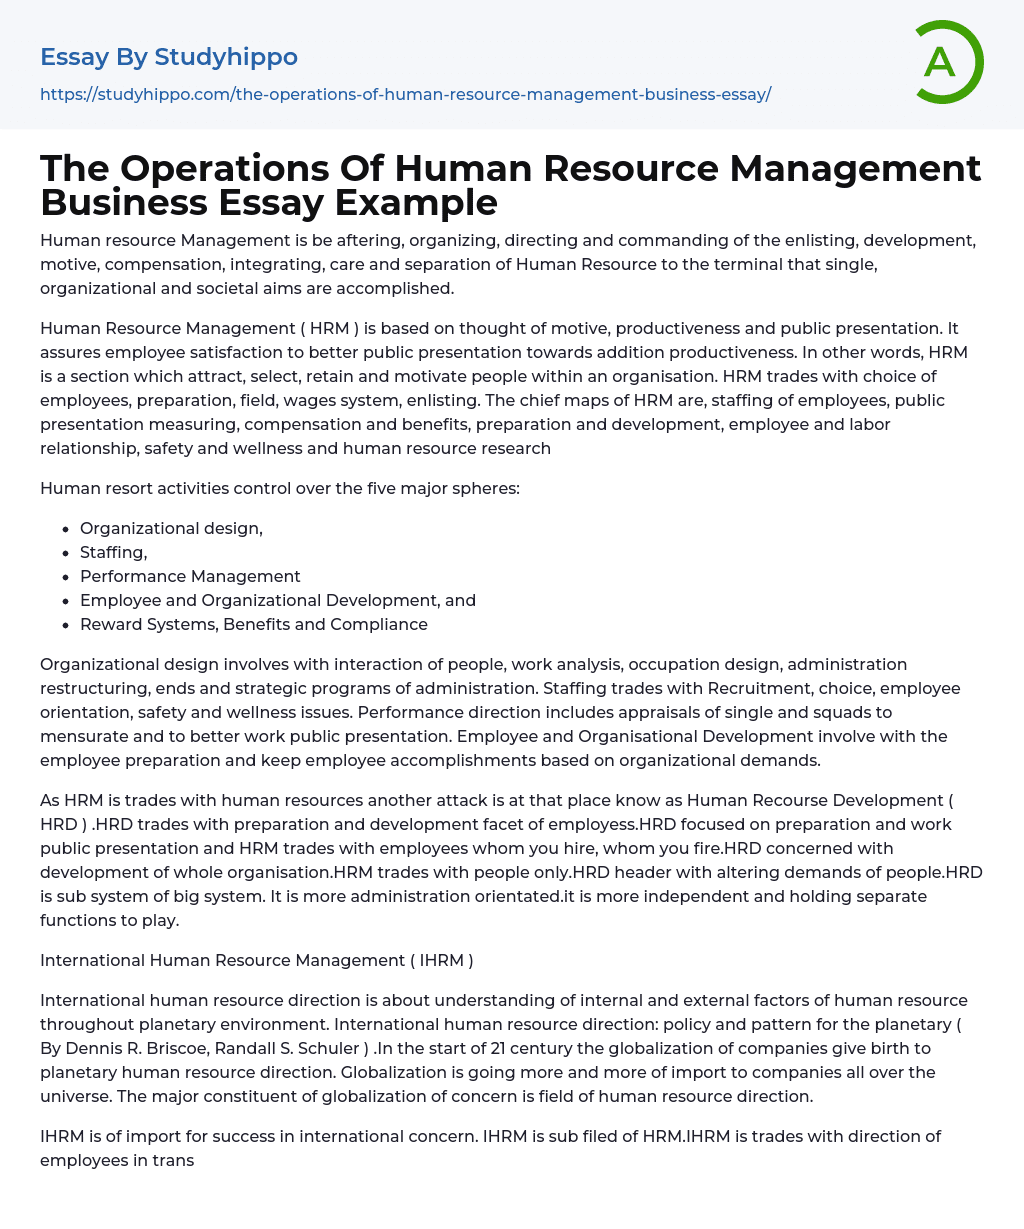 The Operations Of Human Resource Management Business Essay Example